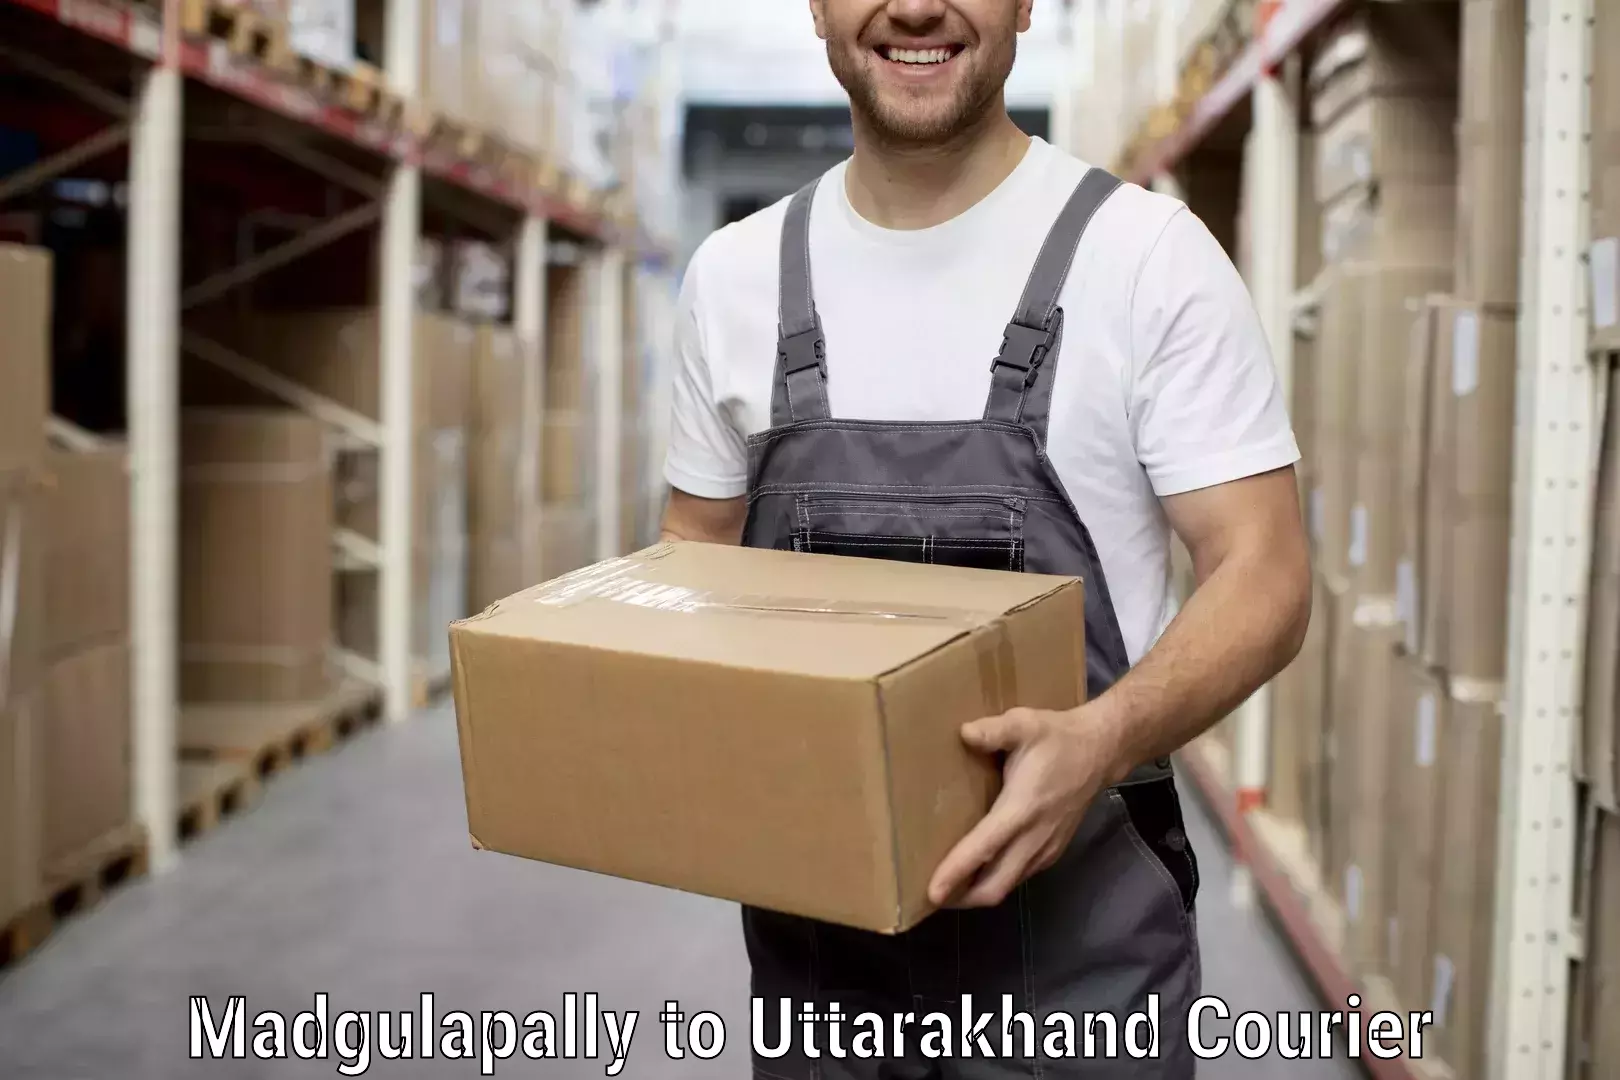 Furniture delivery service Madgulapally to Rudrapur